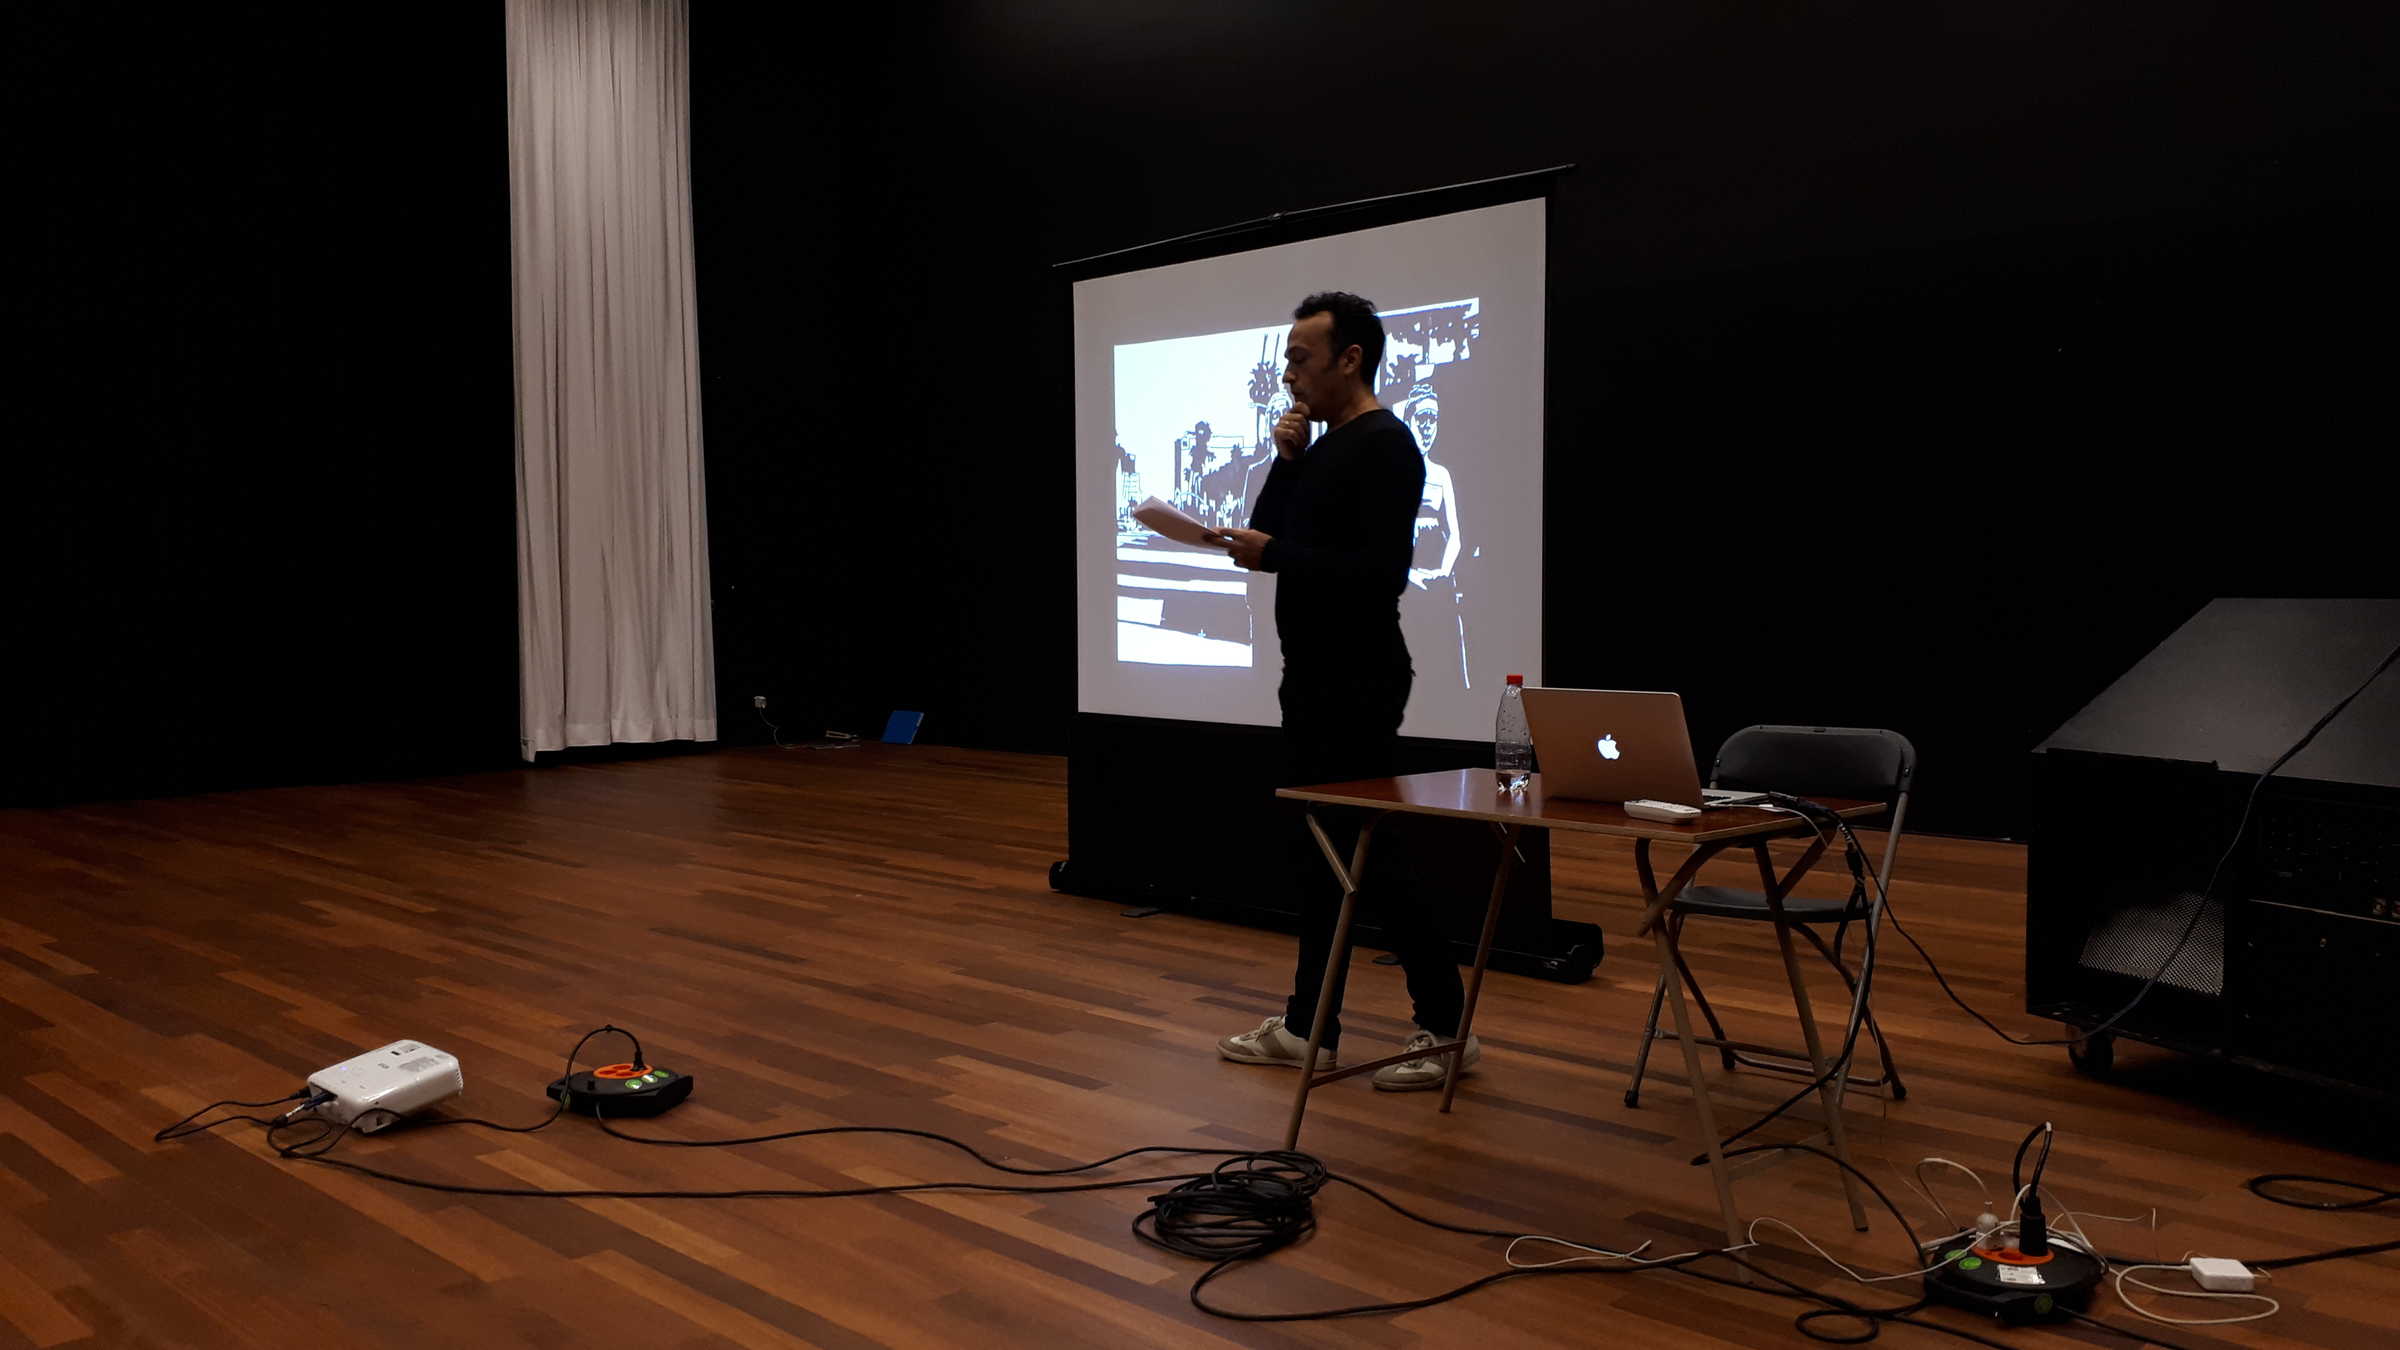 DAI Introductionweek October 2018: Monday 15 October at one of the ArtEZ theatre spaces ~ David Maroto's introduction to his Factory workshop  (Photo: Jacq van der Spek)